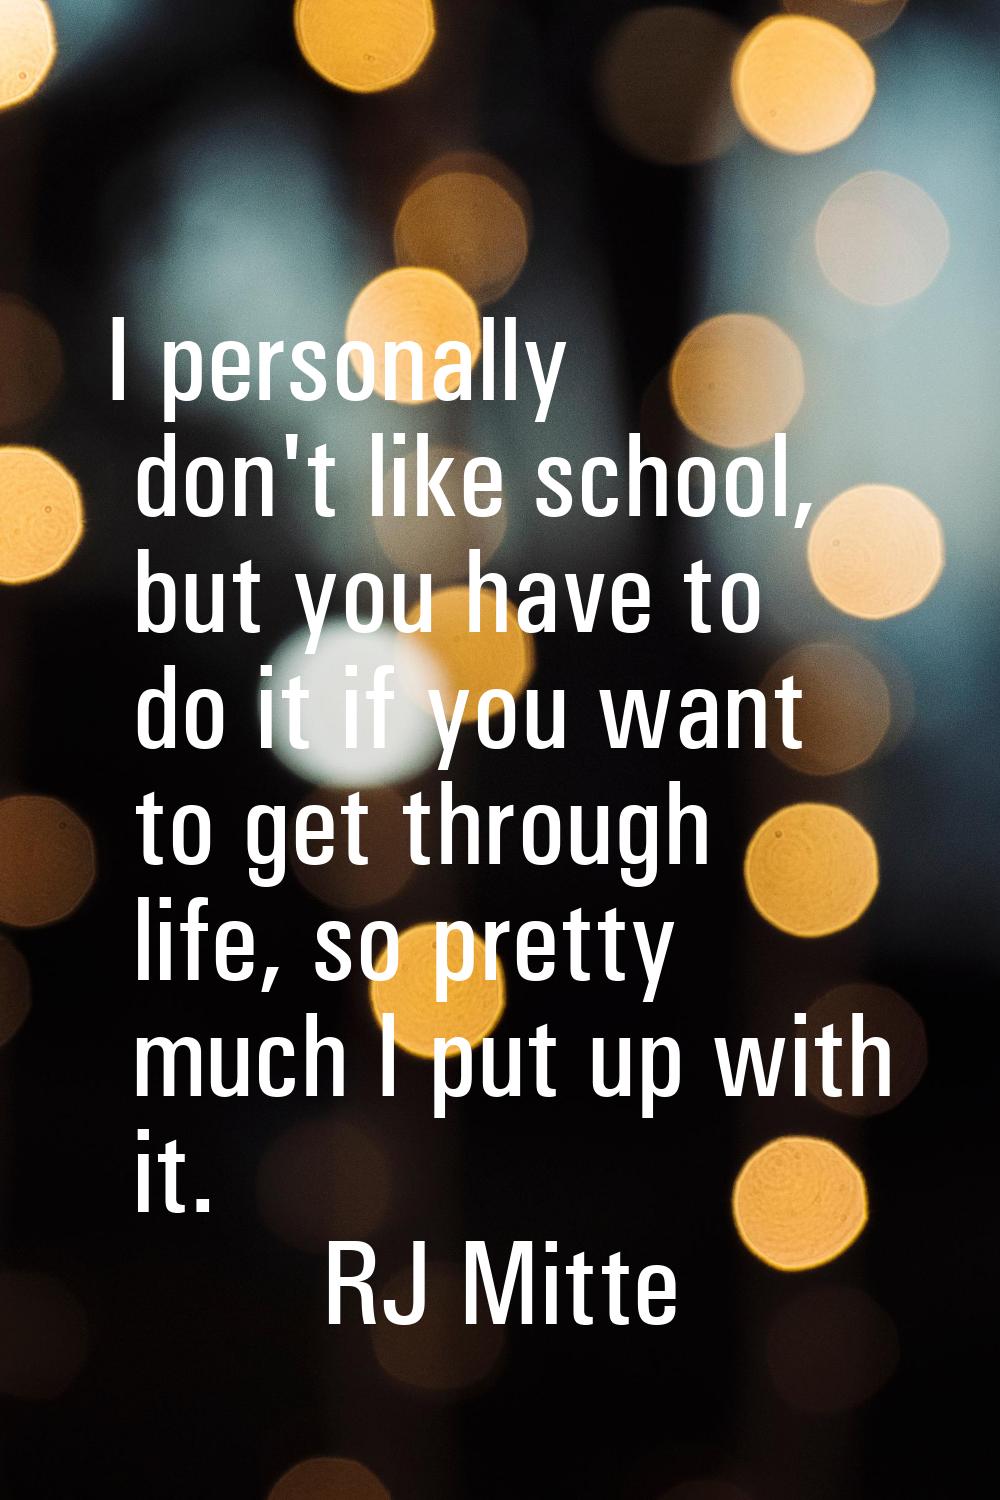 I personally don't like school, but you have to do it if you want to get through life, so pretty mu